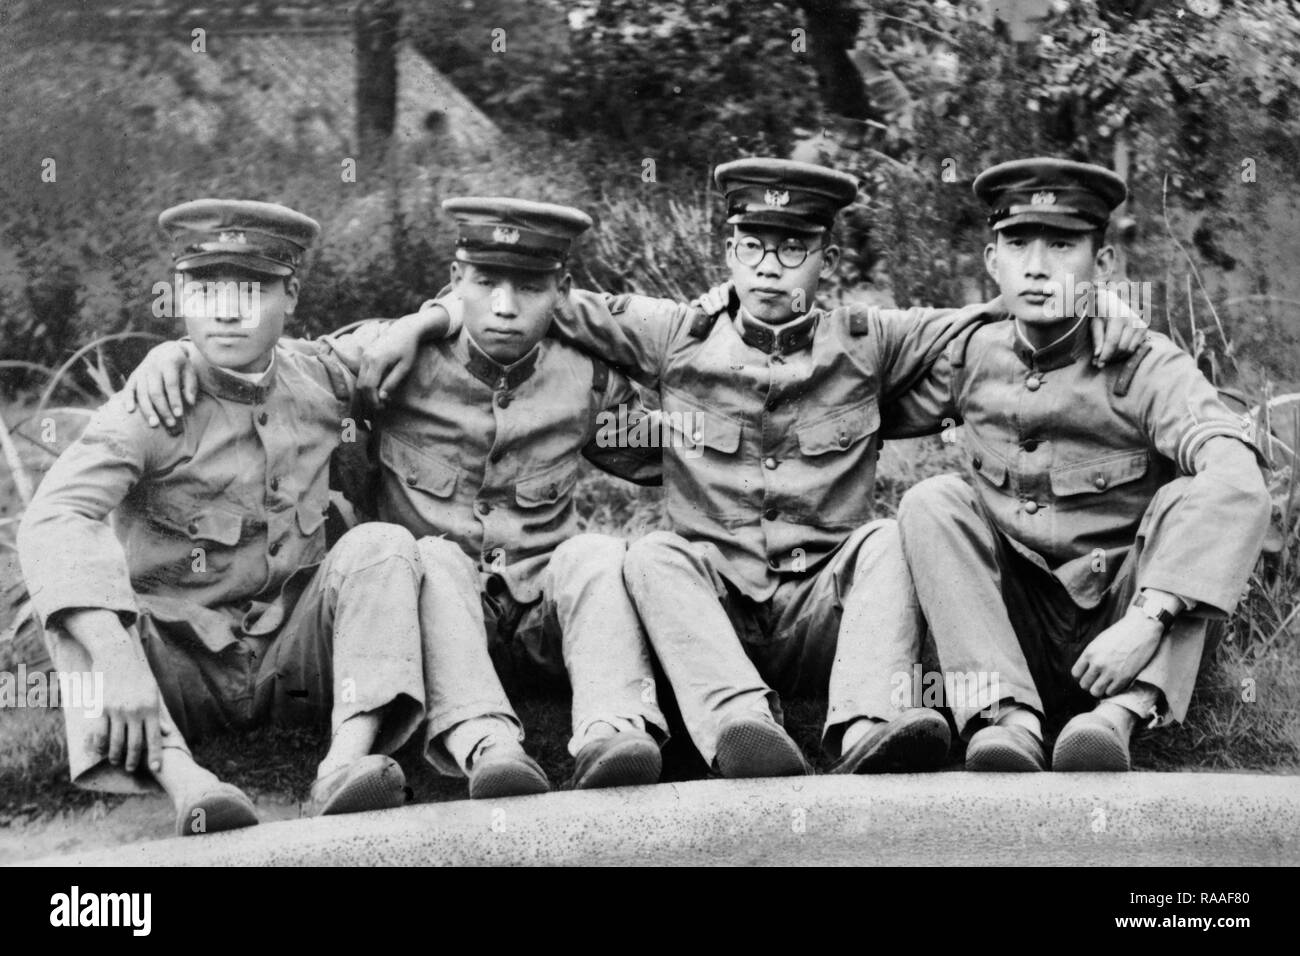 Four Japanese soldiers pose together, ca. 1933. Stock Photo